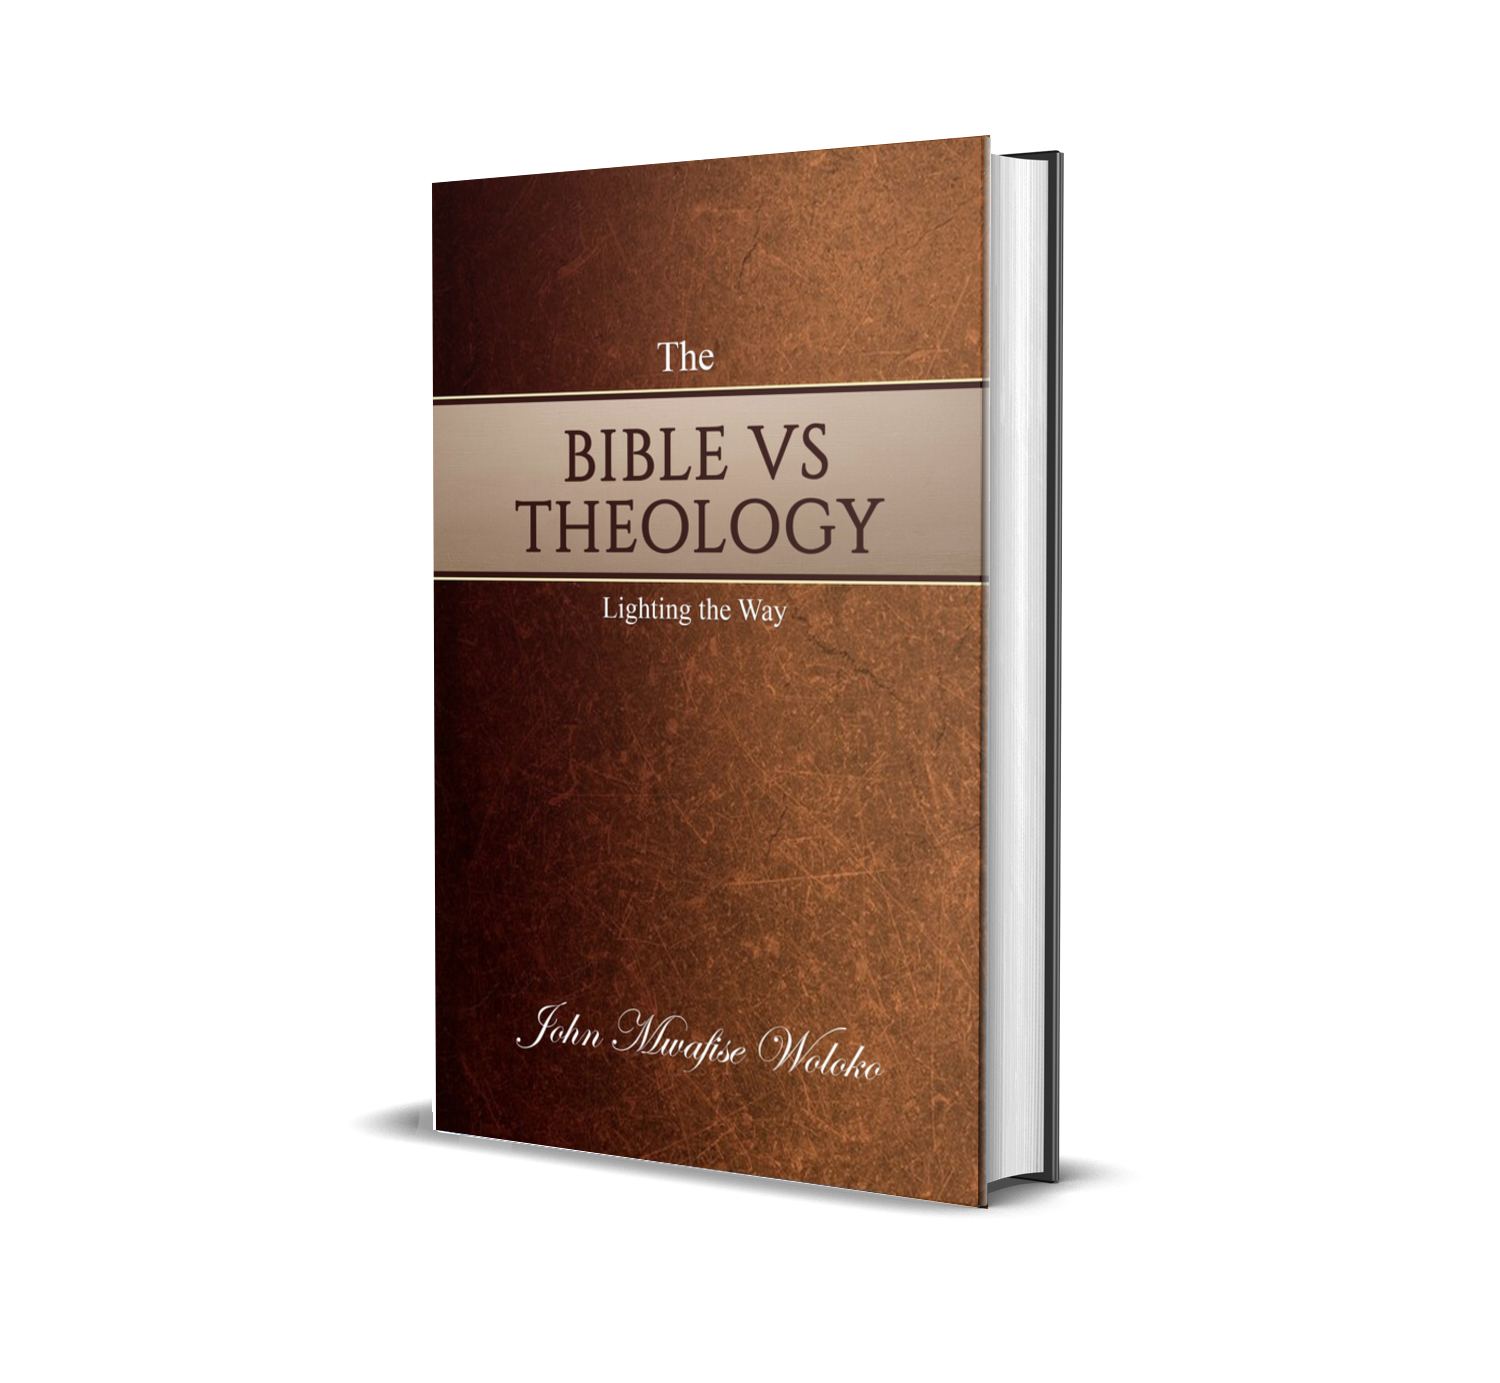 The Bible Vs Theology - Christian Author Weighs In